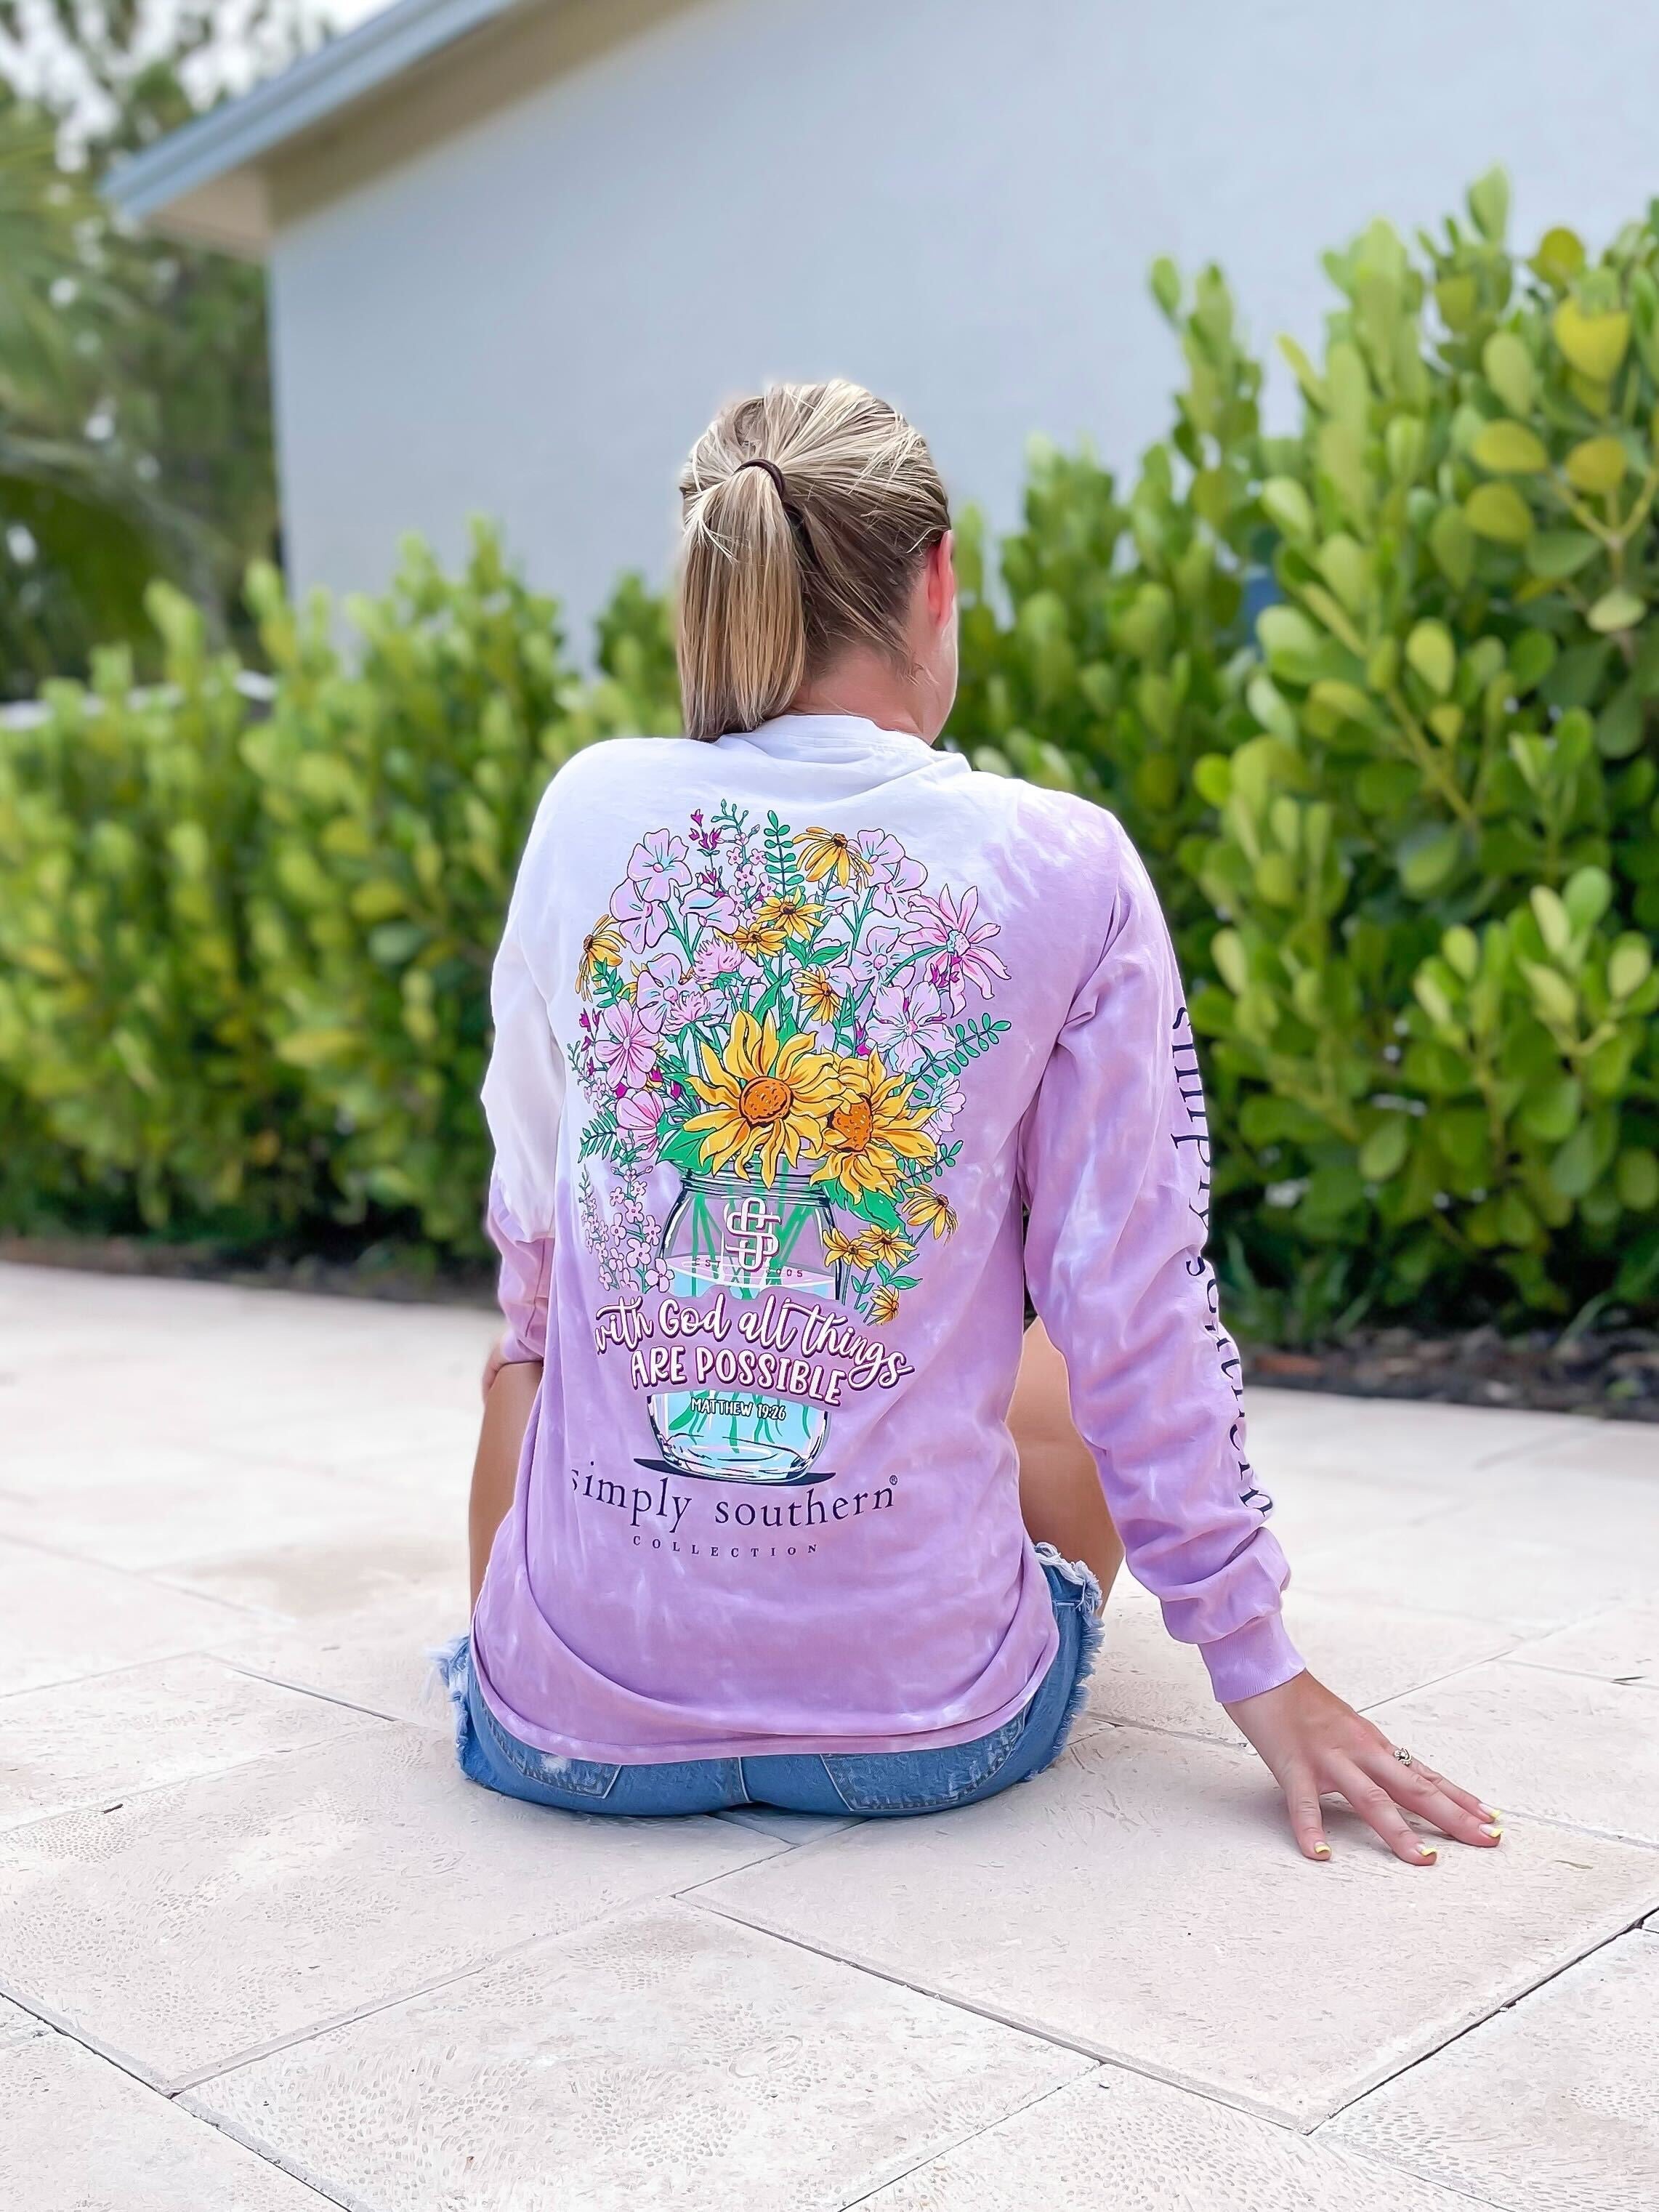 'With God All Things Are Possible' Tie Dye Long Sleeve Tee by Simply Southern